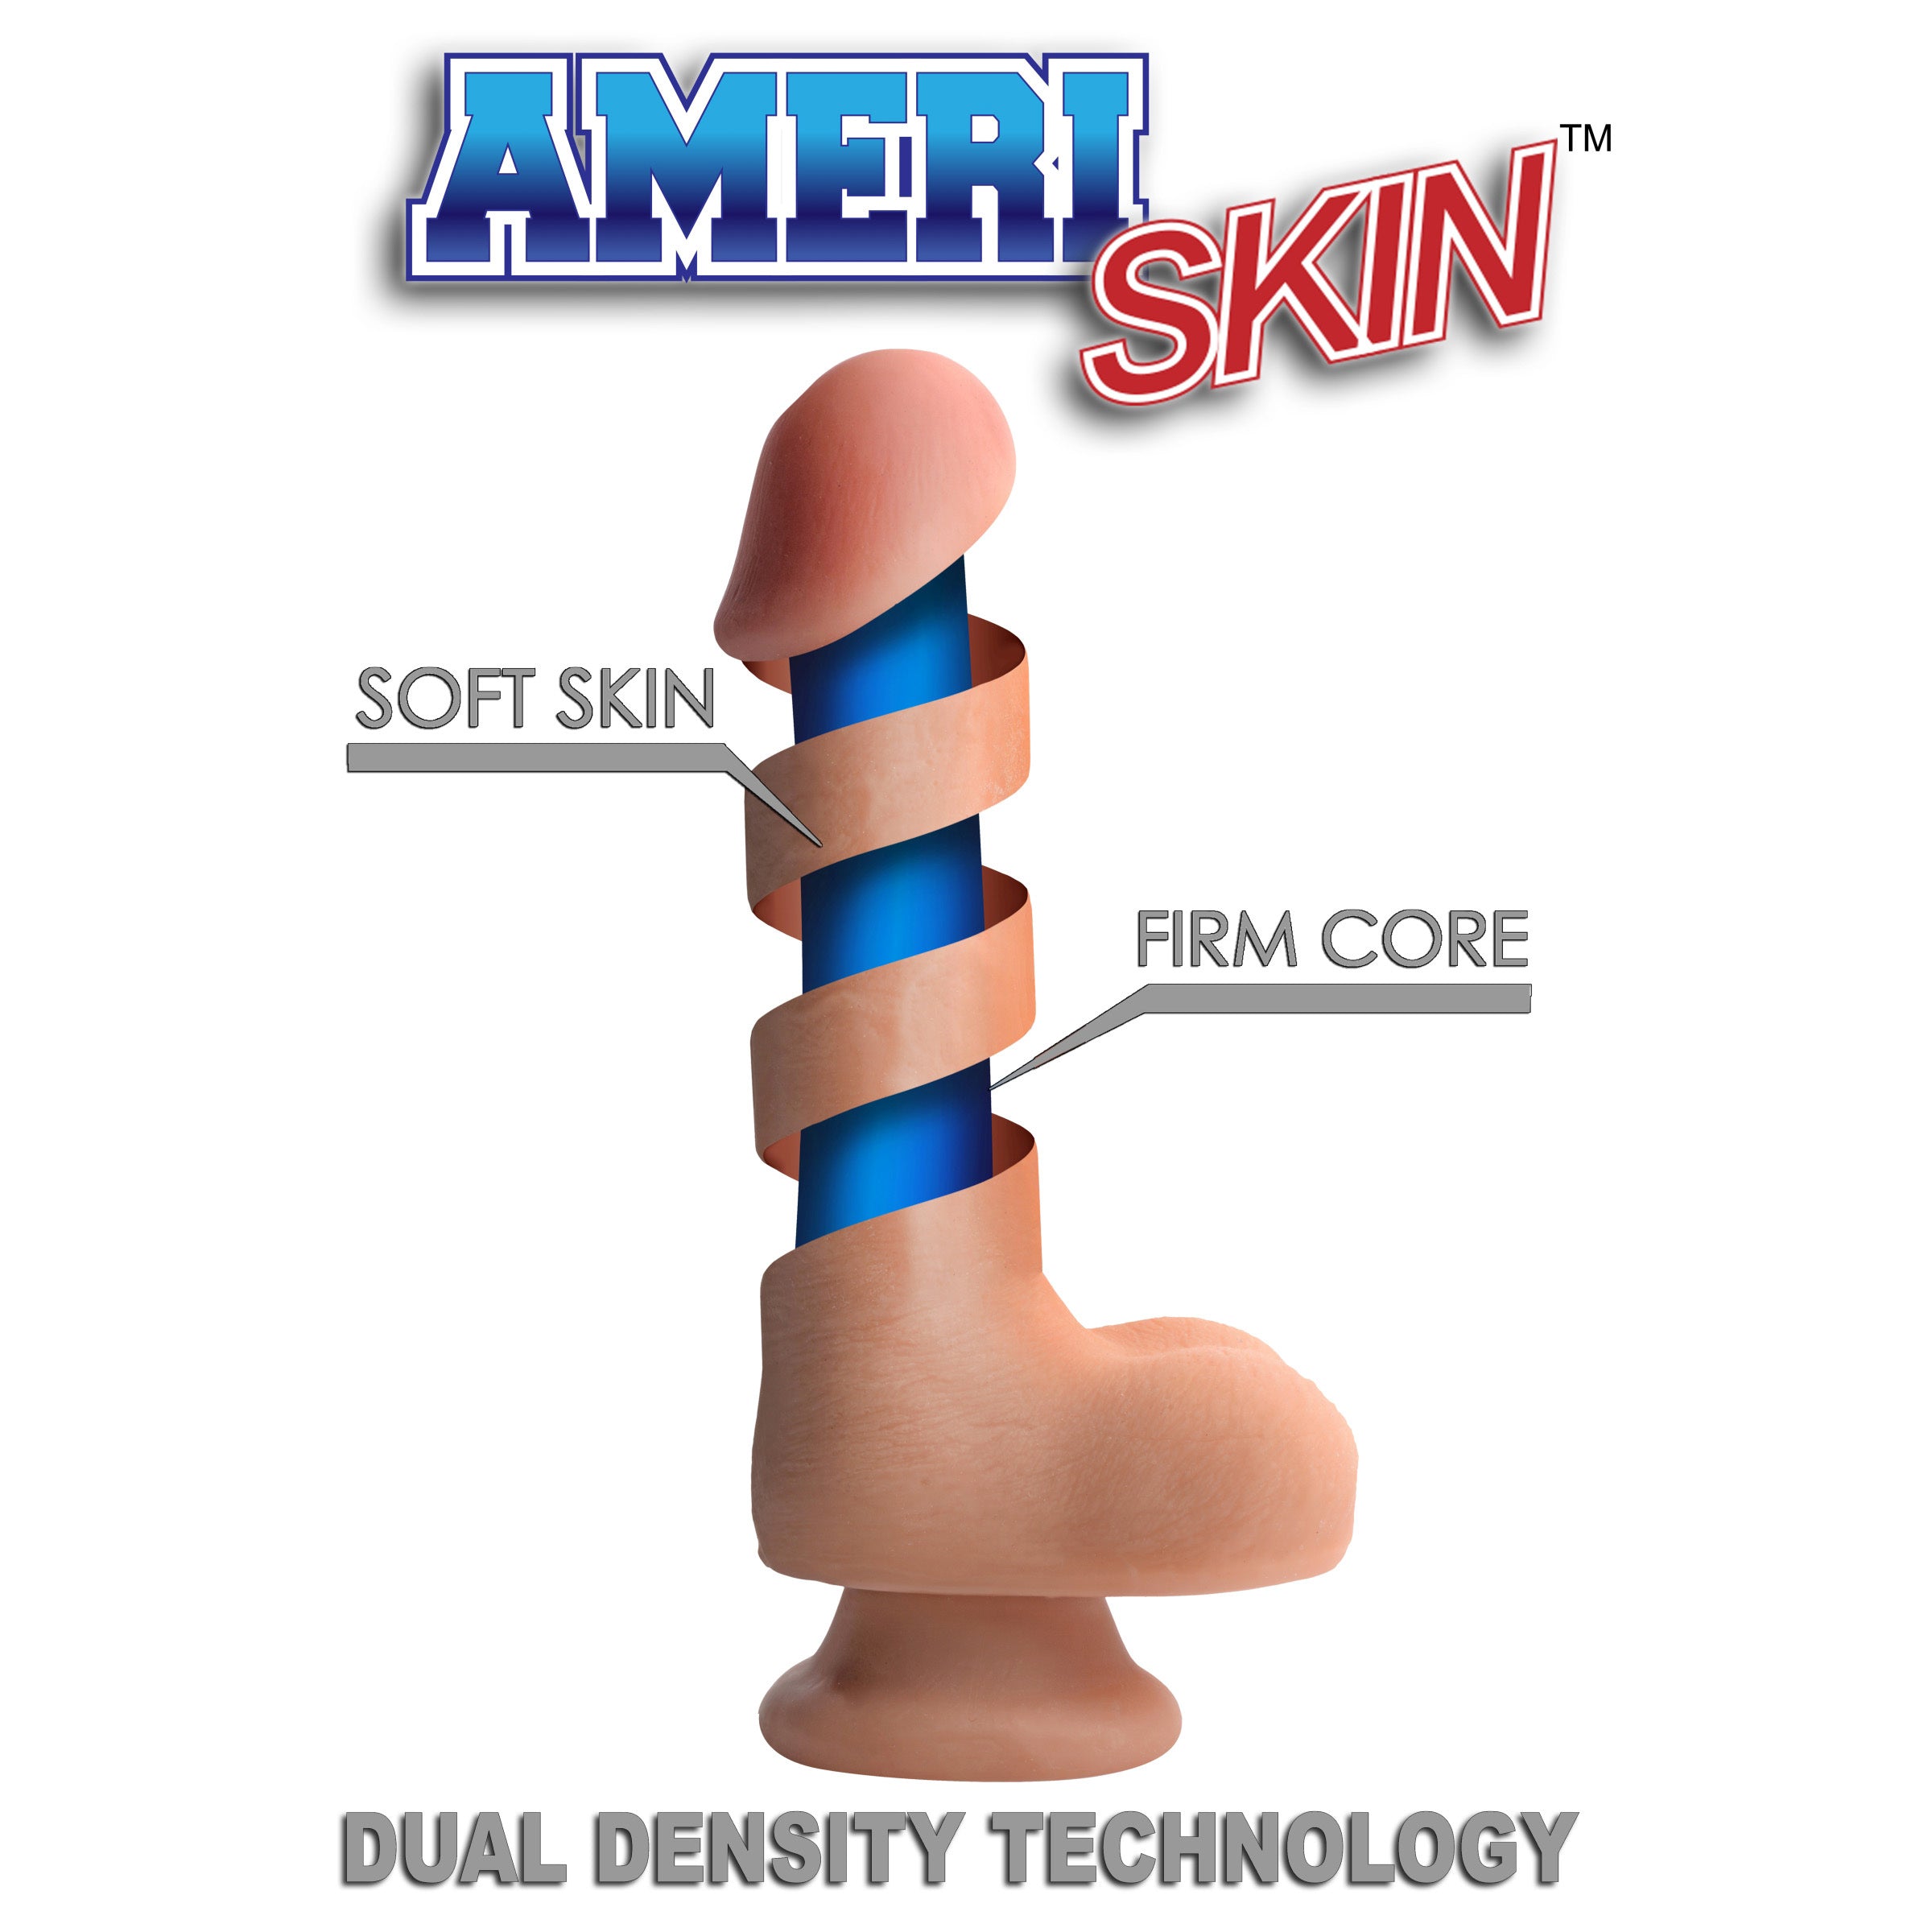 7 Inch Ultra Real Dual Layer Suction Cup Dildo